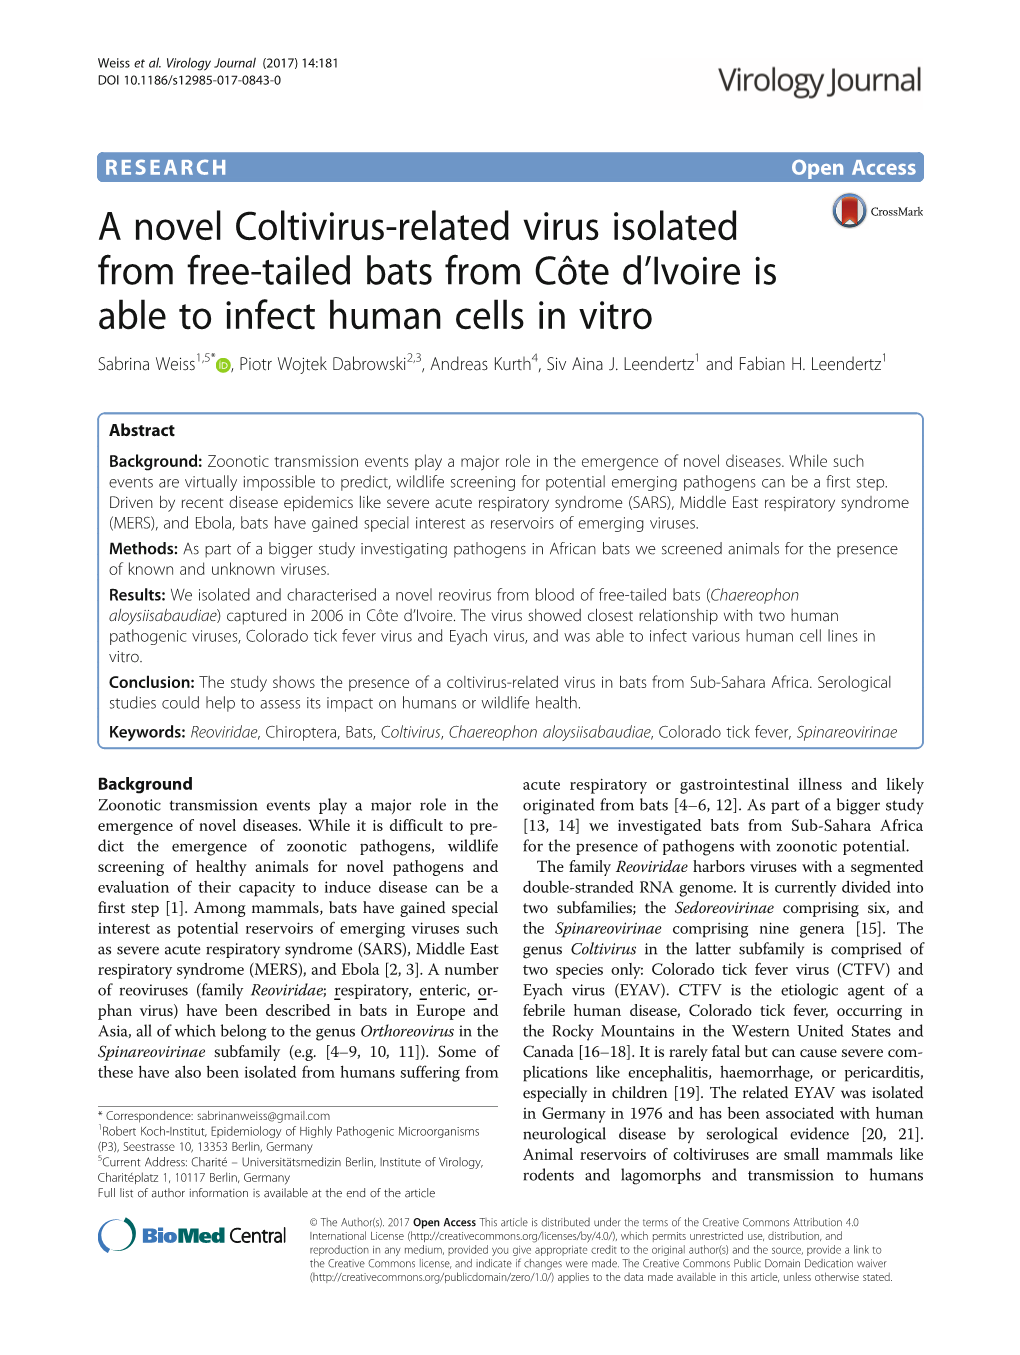 A Novel Coltivirus-Related Virus Isolated from Free-Tailed Bats From